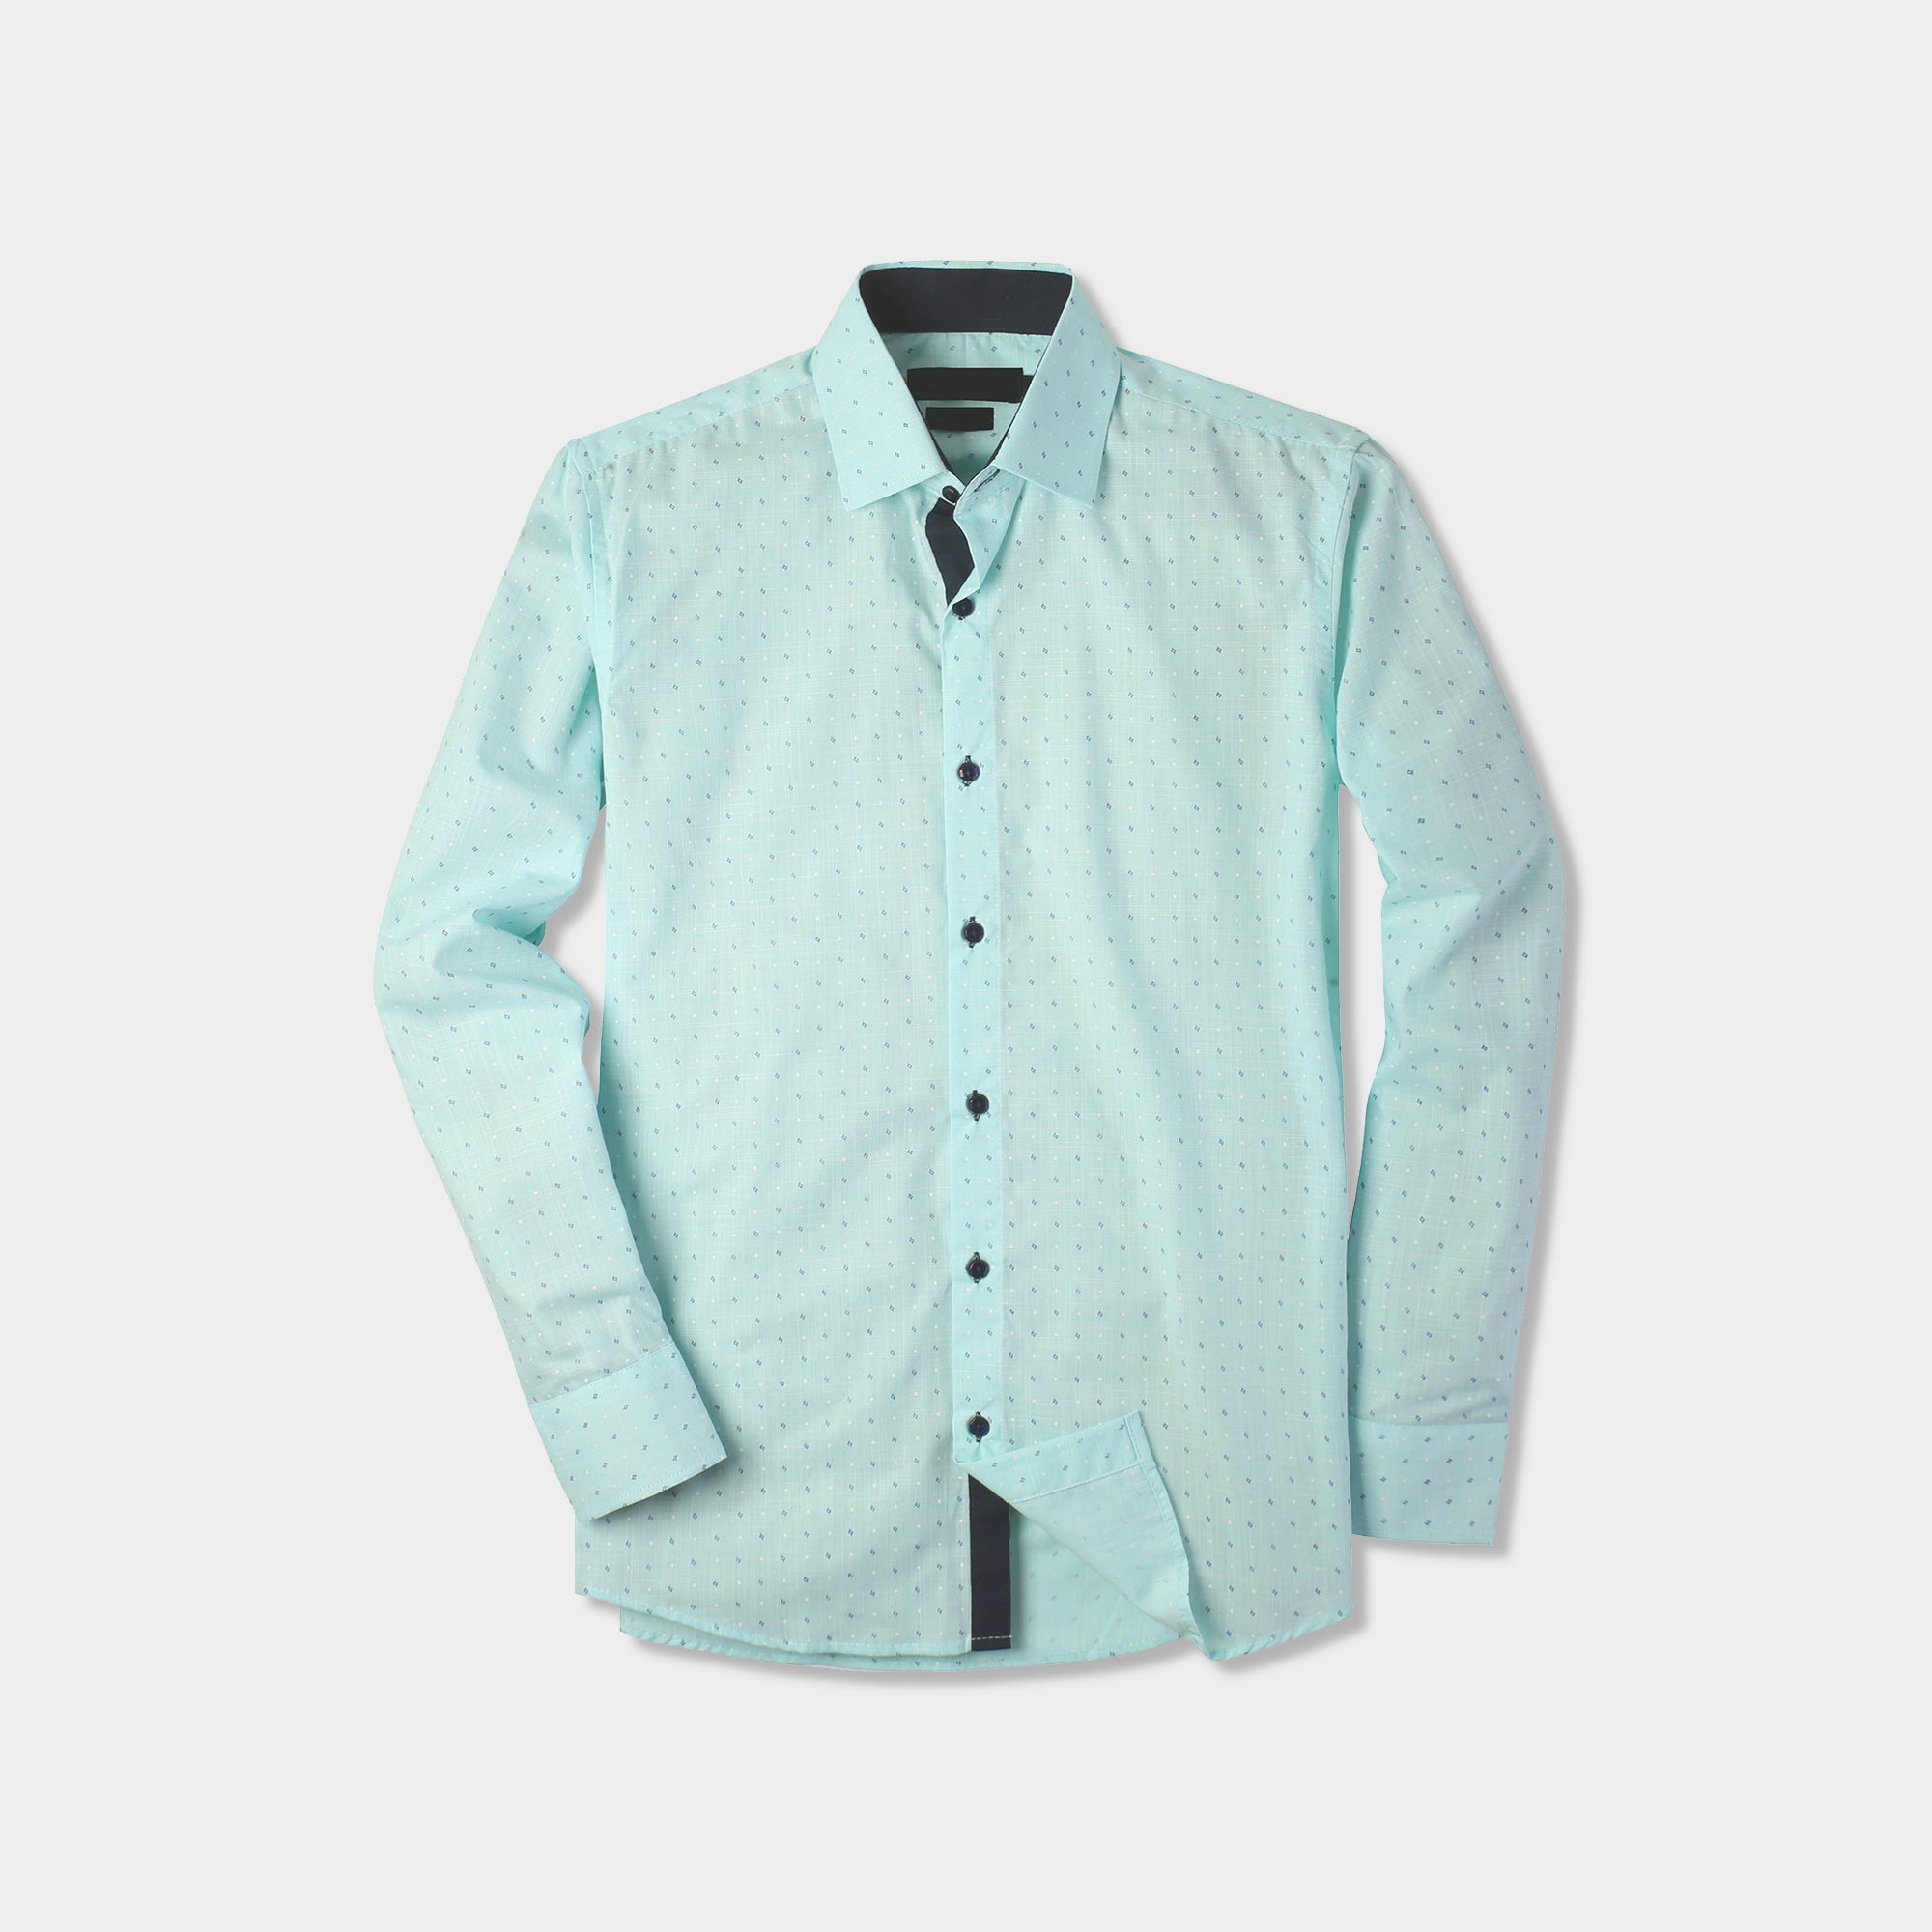 classic shirts_formal shirts_formal shirts for men_formal clothes for men_button down shirt_button down_mens long sleeve button down_Mint Dot